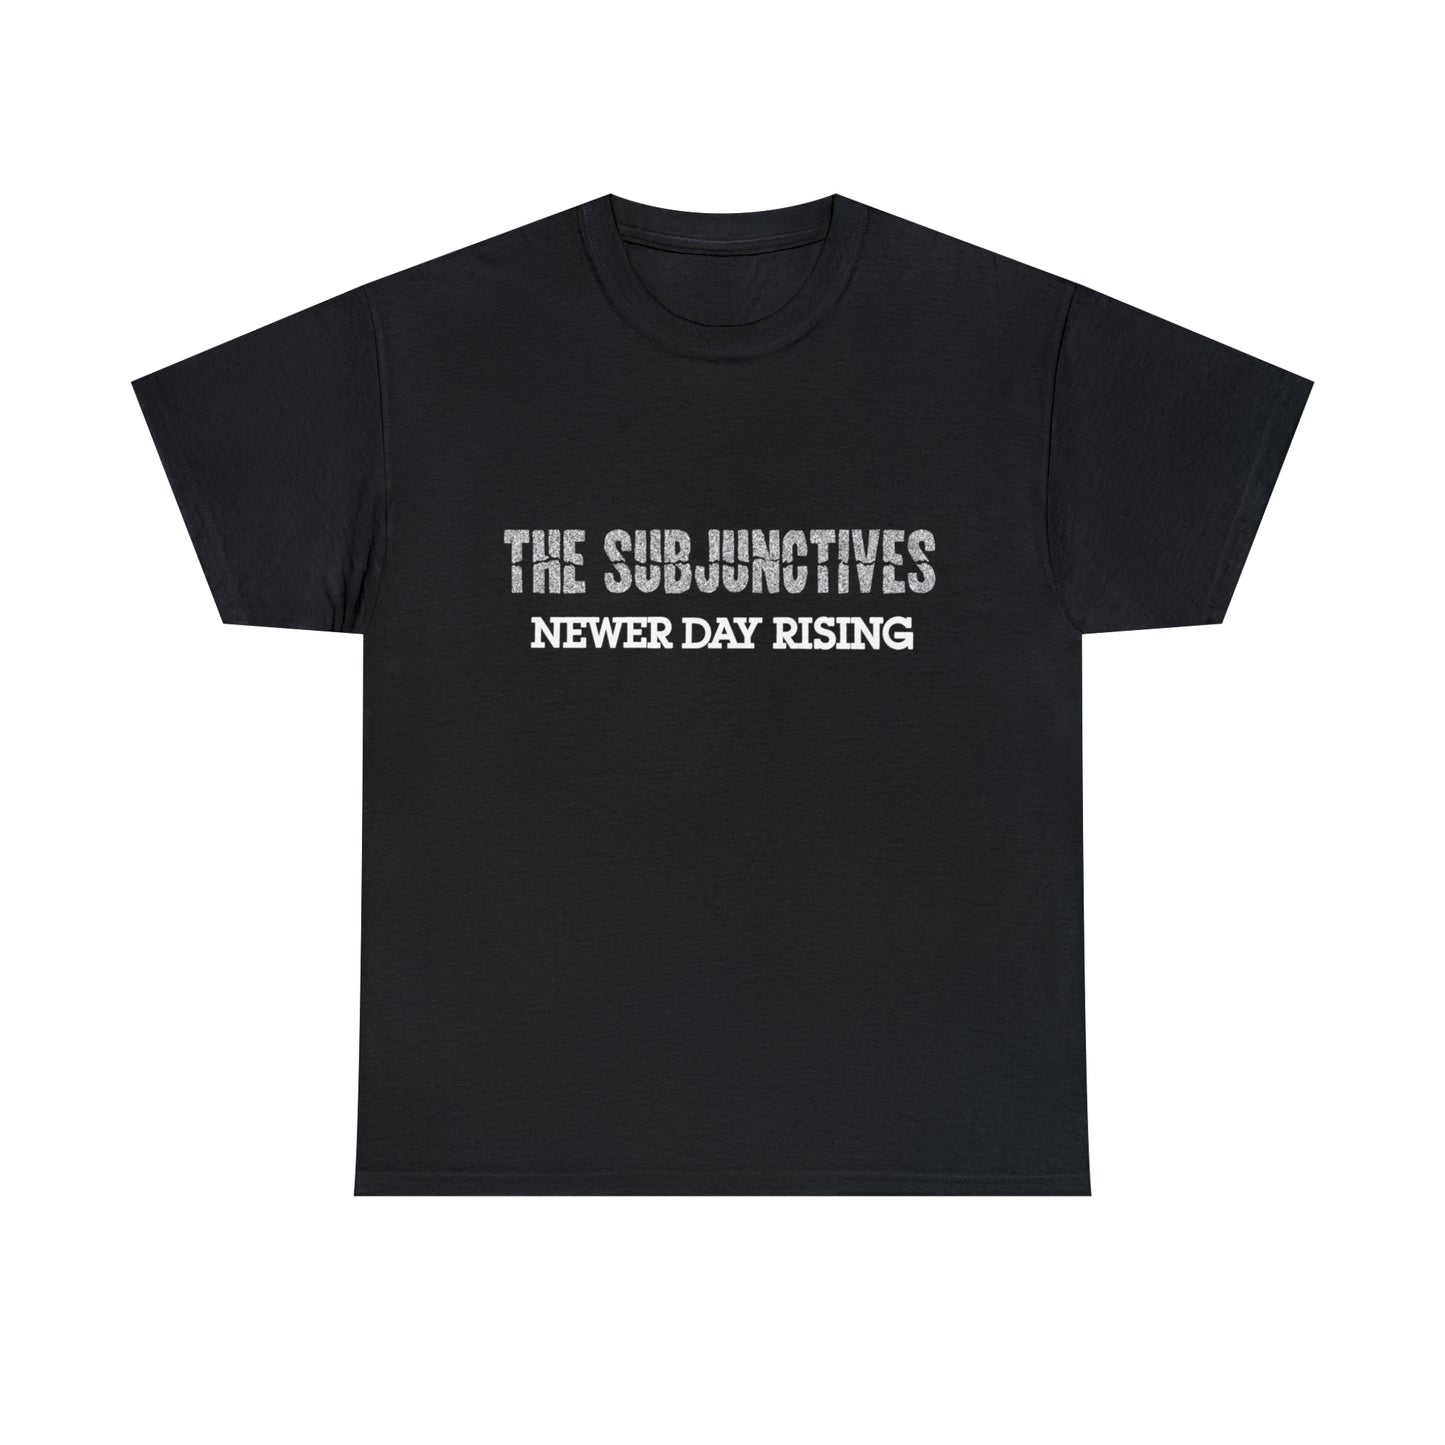 The Subjunctives - Newer Day Rising T-shirt